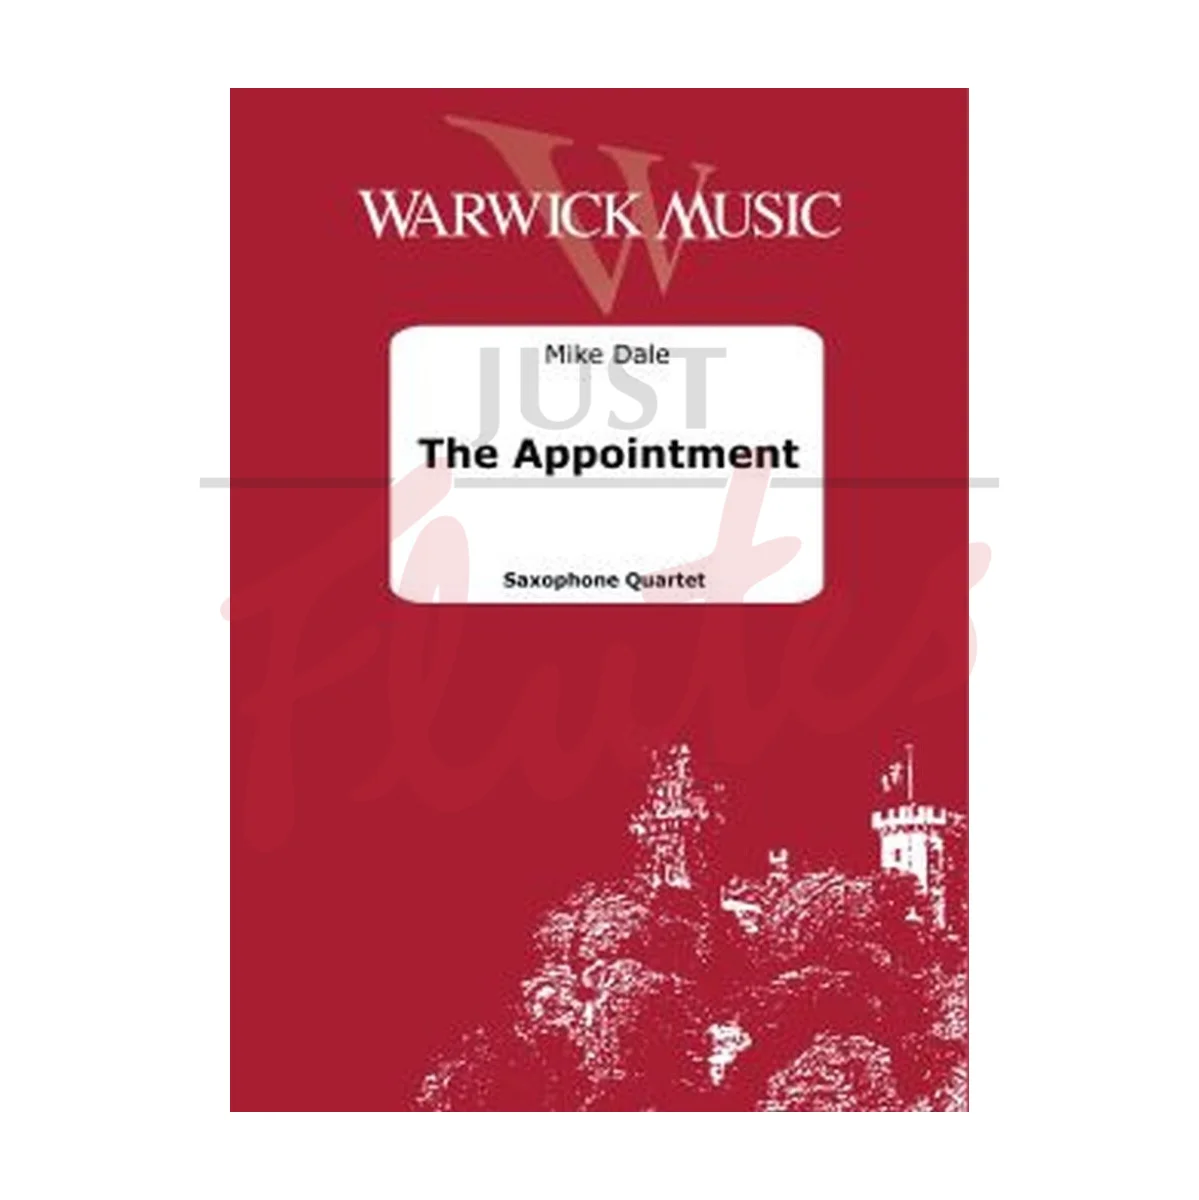 The Appointment for Saxophone Quartet